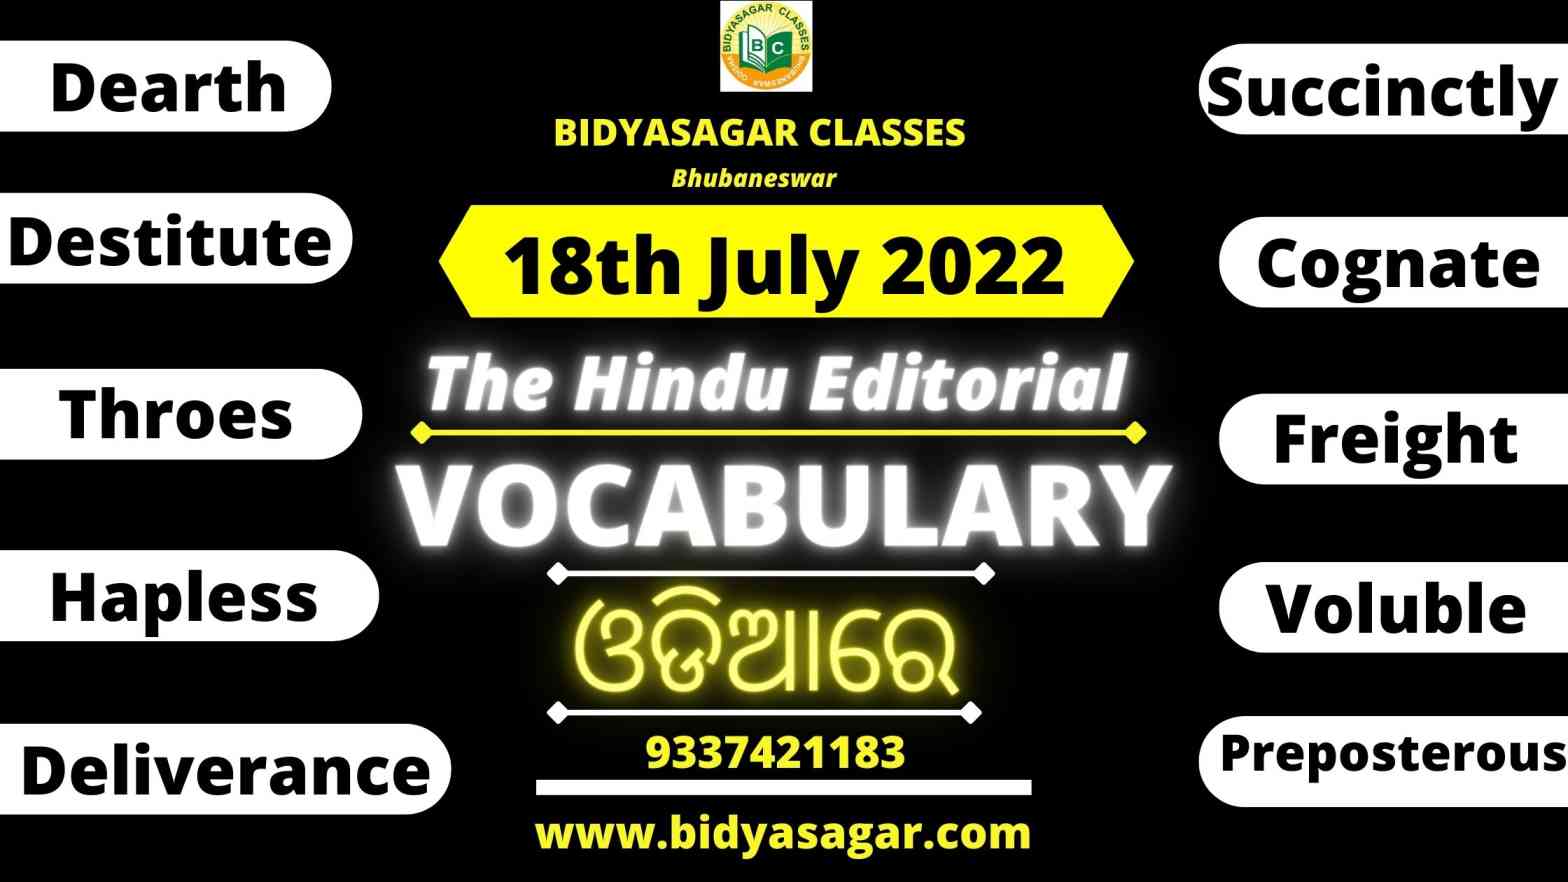 The Hindu Editorial Vocabulary of 18th July 2022